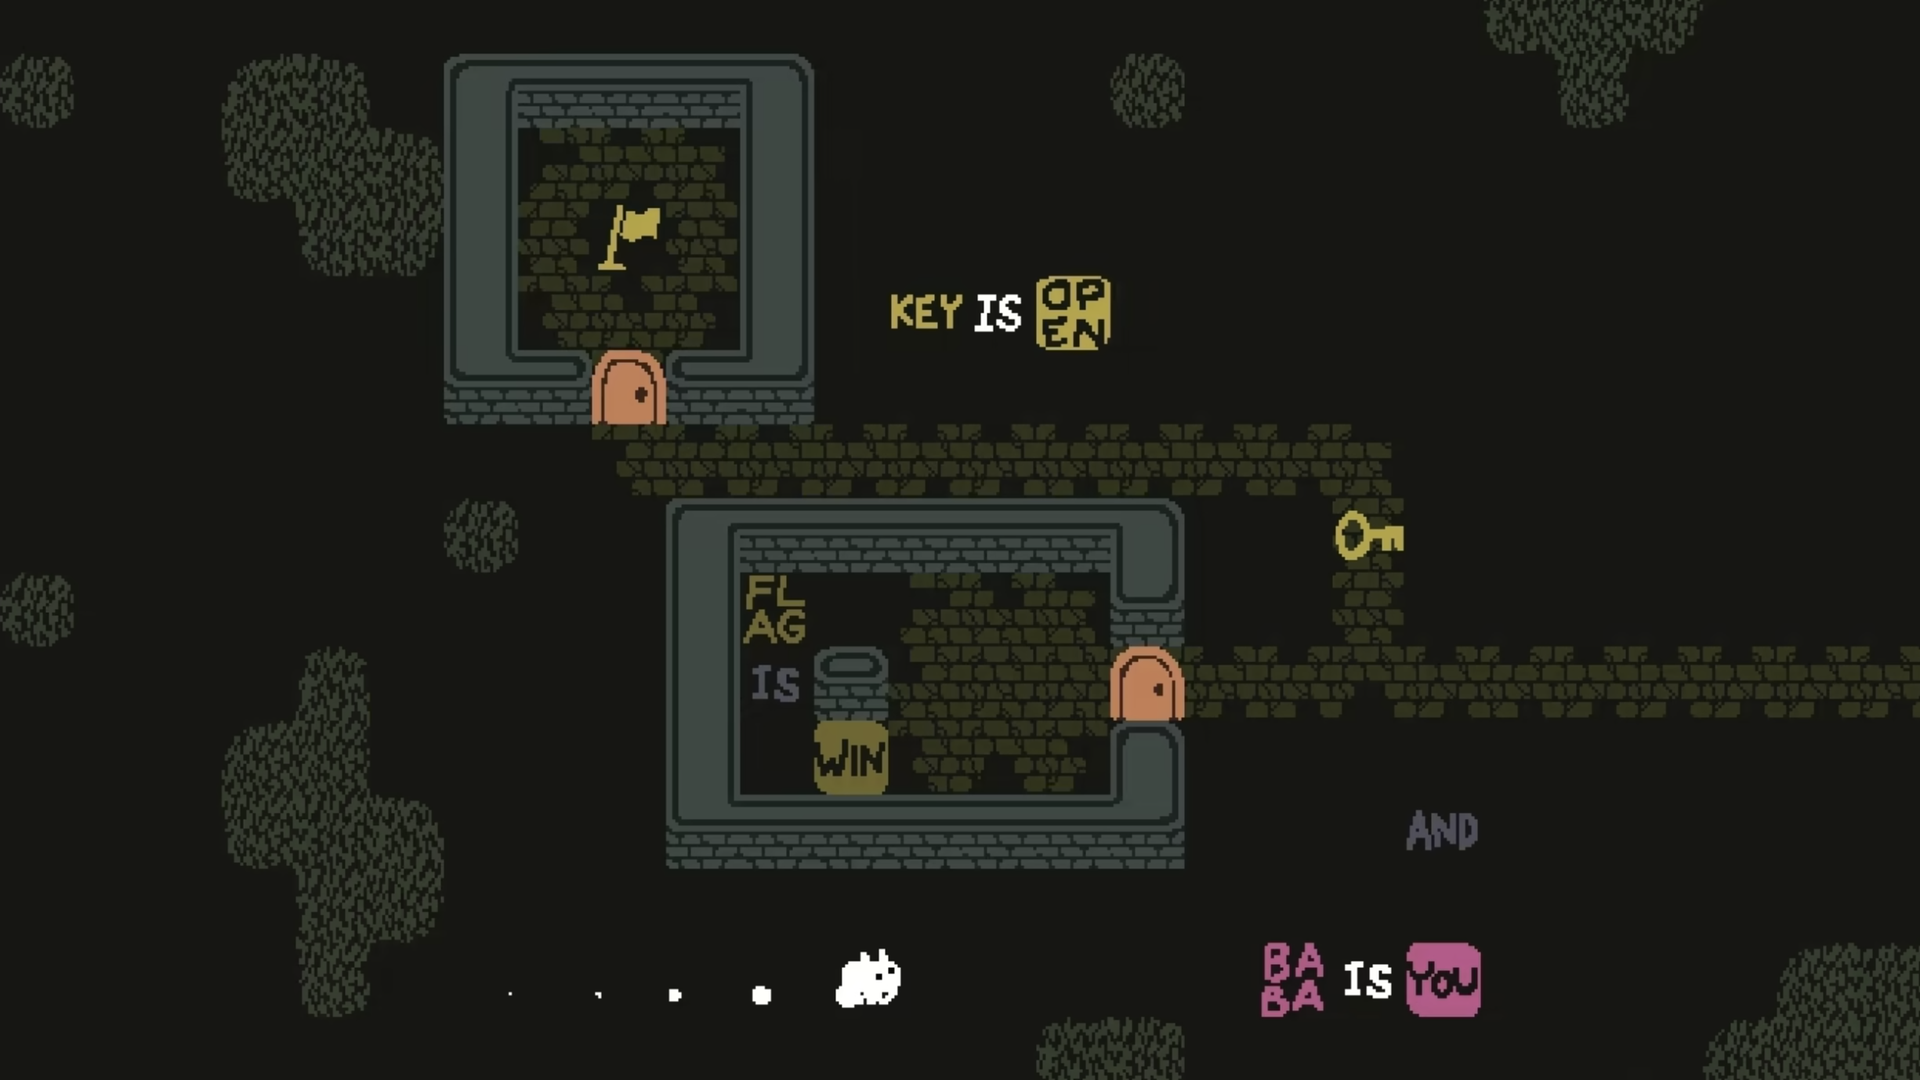 Video game screenshot of a puzzle game in which a creature needs to get past some brick walls